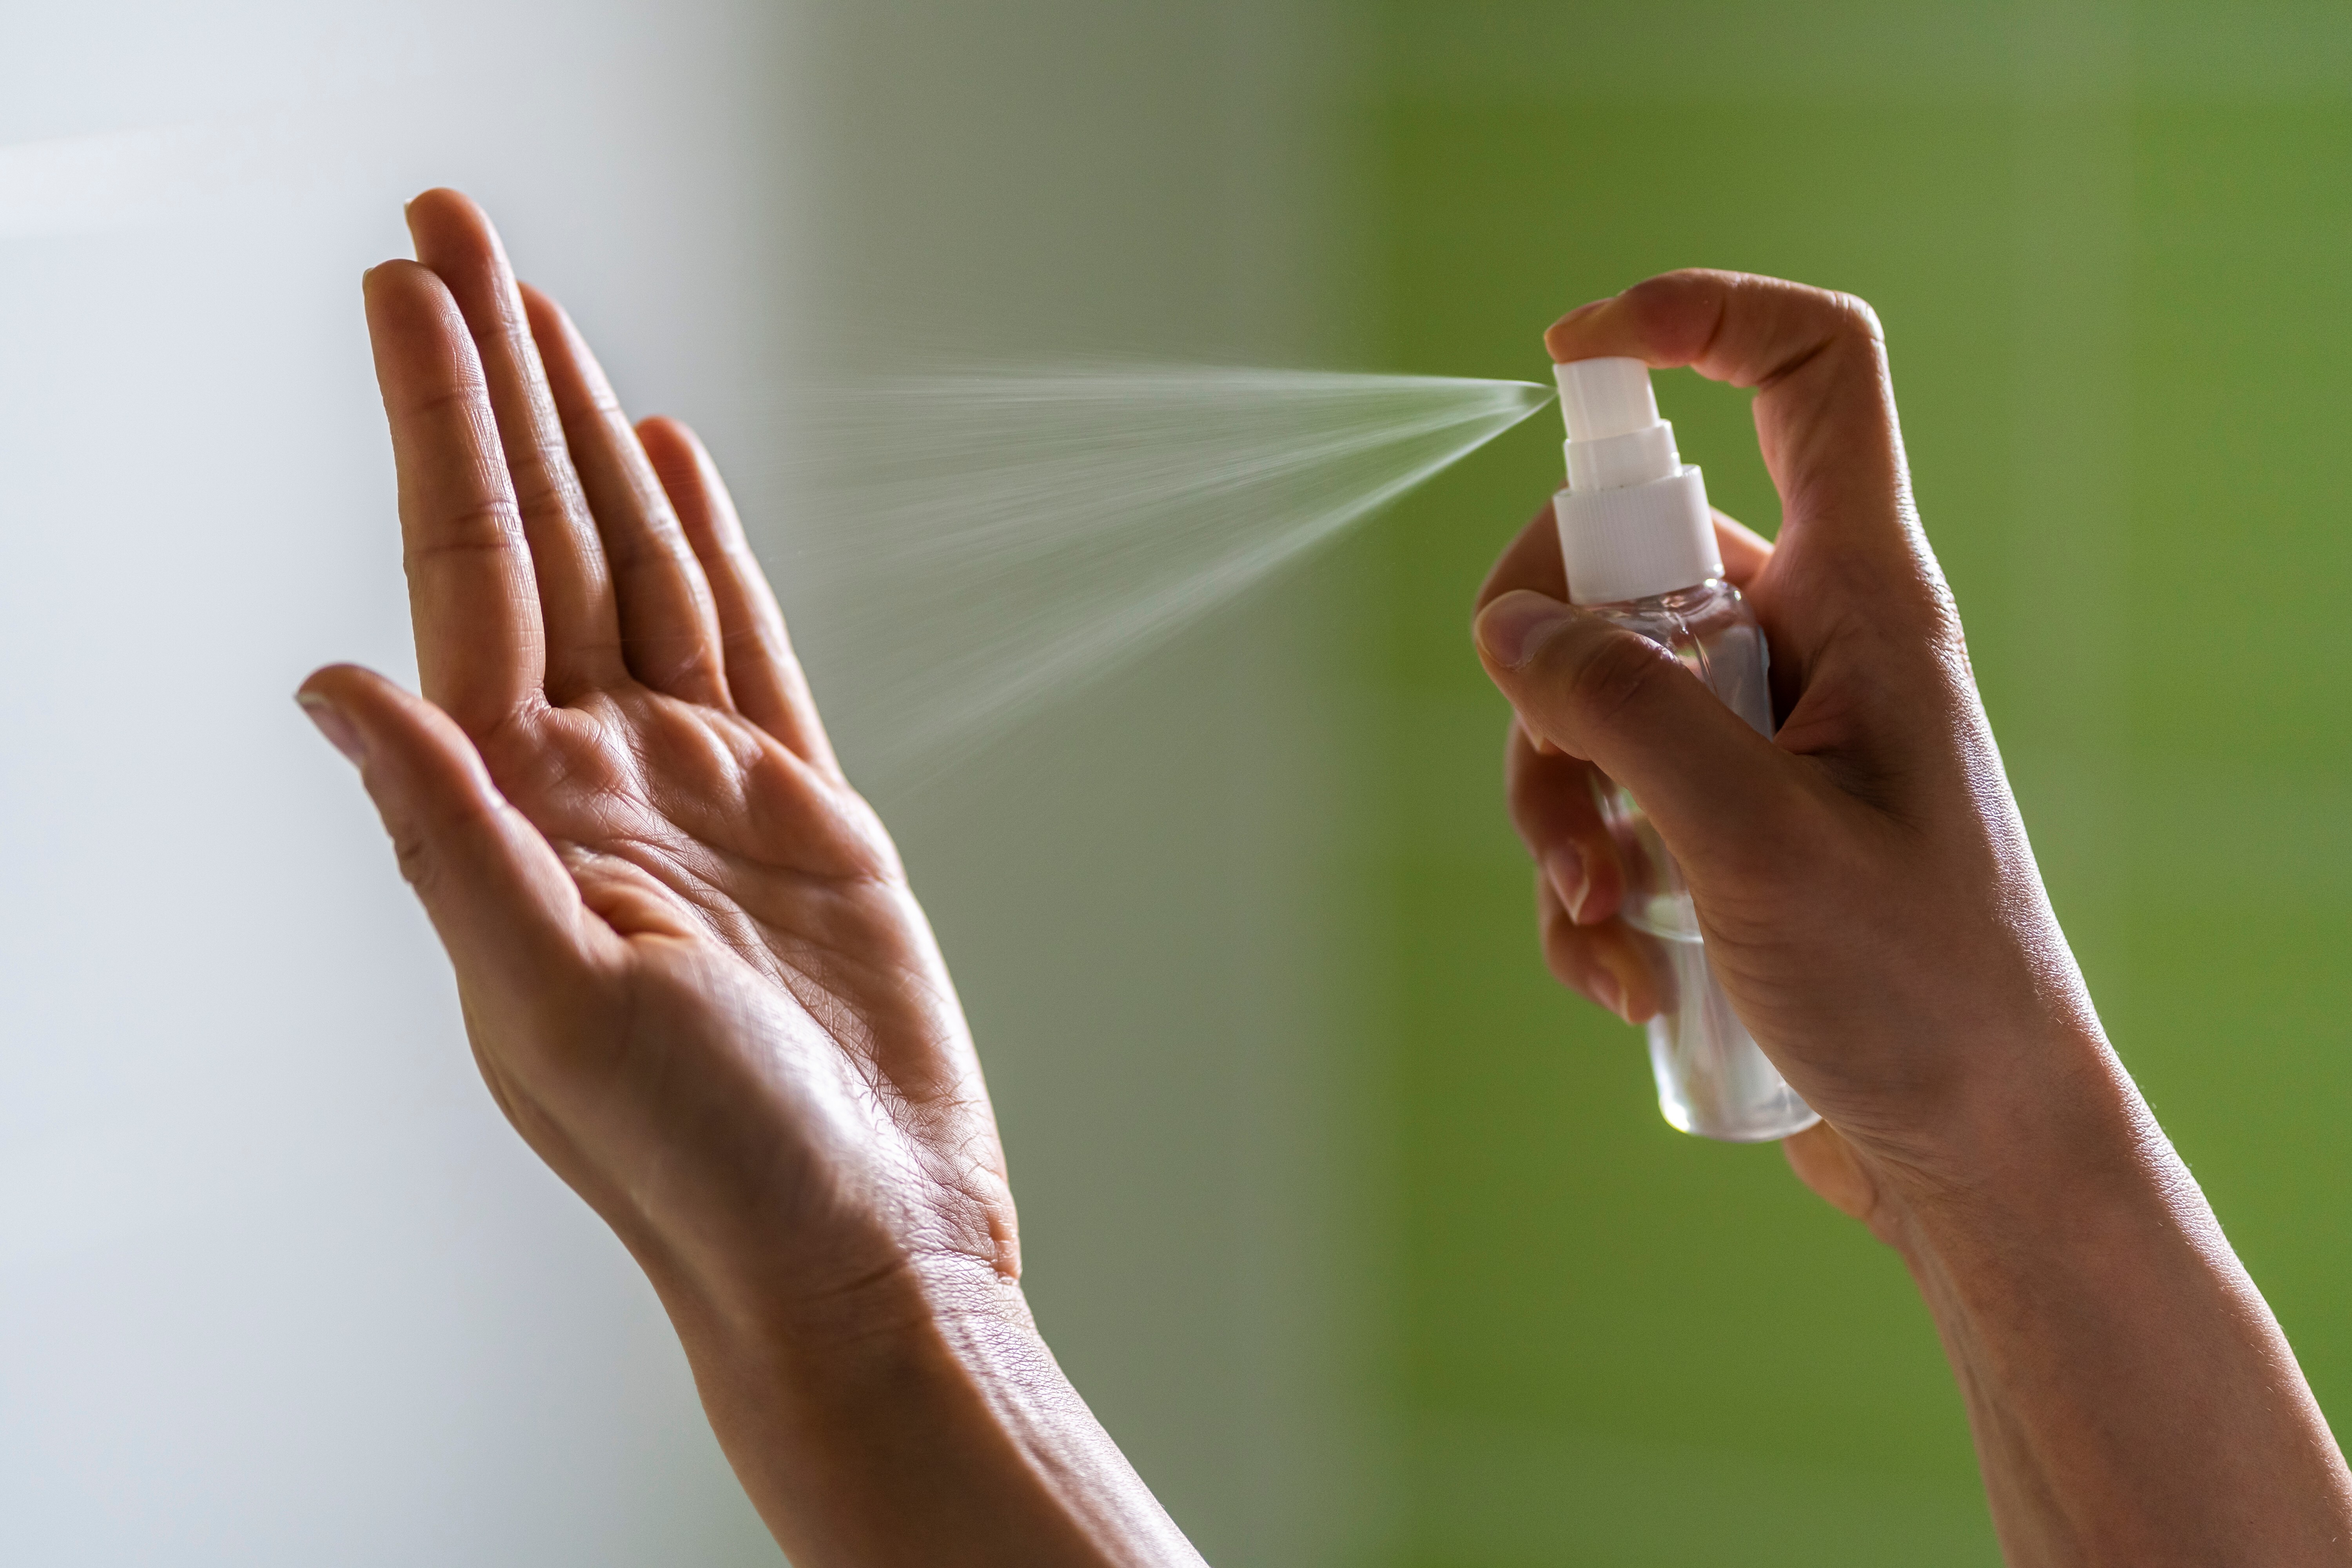 Tests by Hong Kong’s consumer watchdog found six of 24 locally sold alcohol-based disinfectants had trace amounts of methanol, a violation of the city’s Consumer Goods Safety Ordinance. Photo: Shutterstock